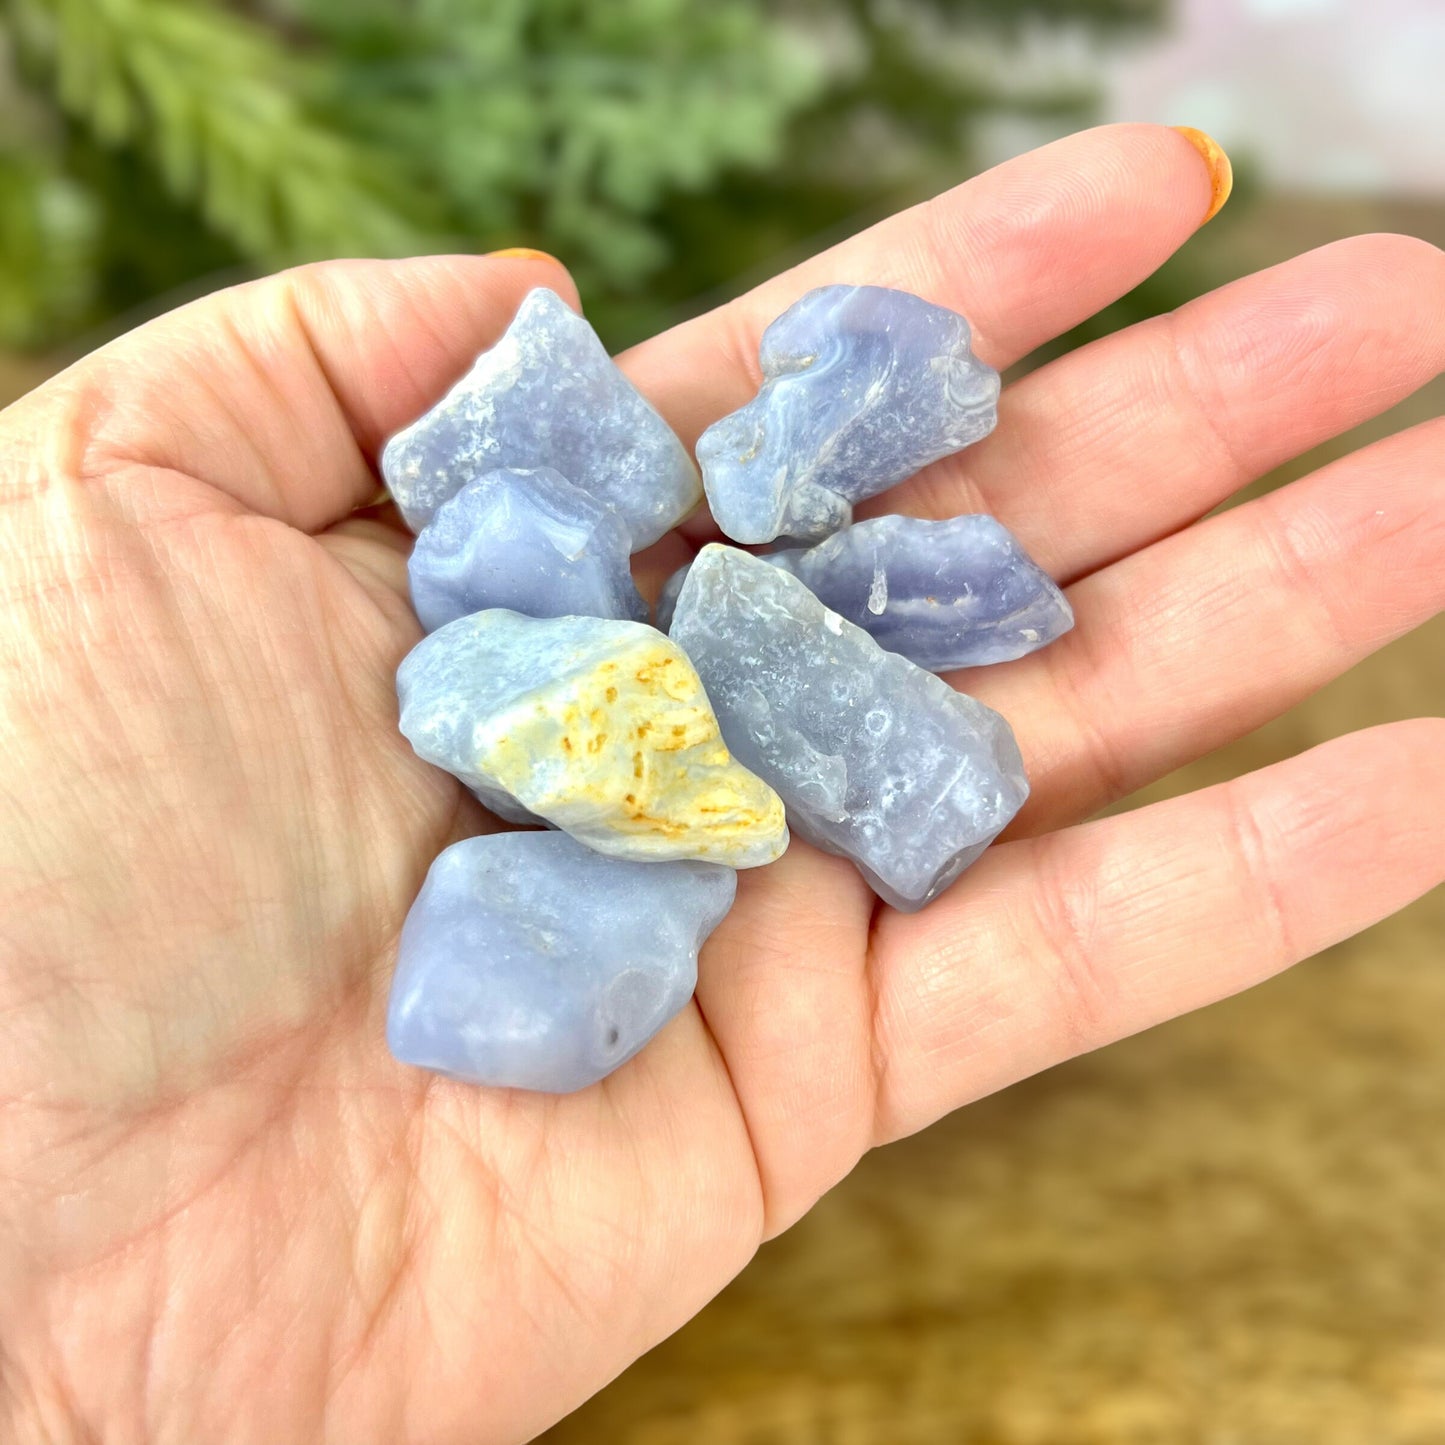 Blue Lace Agate Tumbled Crystal with Matte Finish - You get one